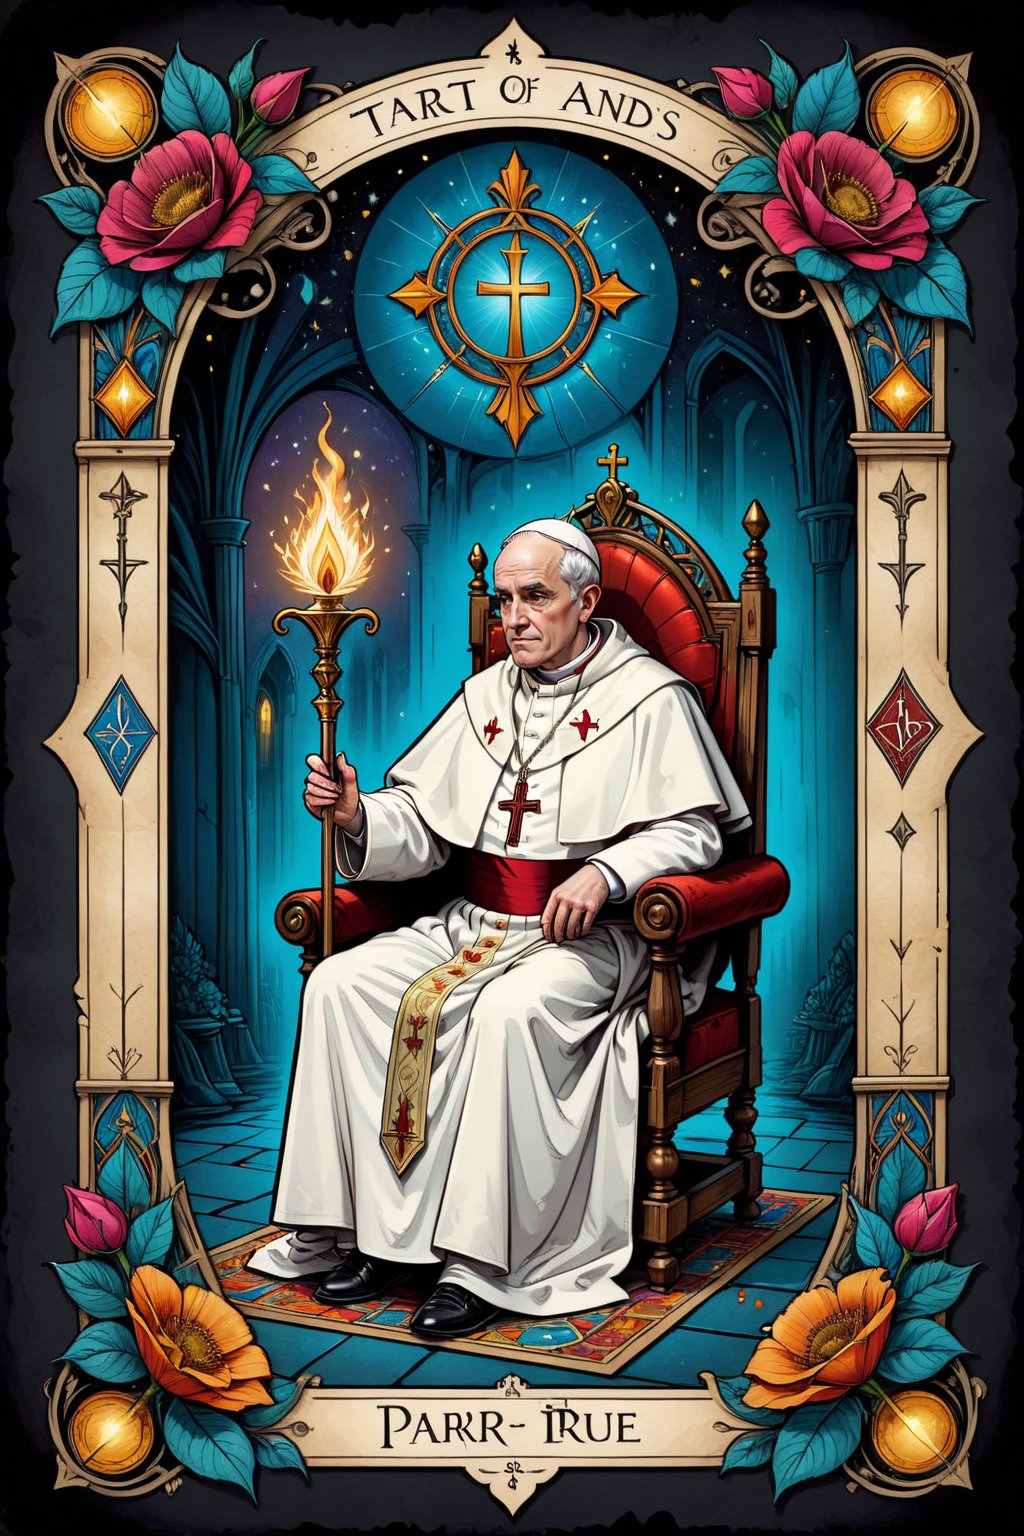 || Tarot card wit art deco frame, an ink drawing, a digital painting of the Priest - the pope, with crown and staff sitting on his throne with two monks looking up to him -, decorative flowers ||  pen and ink, liquid ink, best quality, double exposure, vintage triadic colors, realistic artstyle, stylized urban fantasy artwork, stunning digital illustration, stylized urban fantasy artwork, beautiful digital illustration, mysterious and detailed image, in the style of Craola, Dan Mumford, Andy Kehoe, 2d, flat, vintage, cracked paper art, patchwork, detailed storybook illustration, cinematic, ultra highly detailed, mystical, luminism, vibrant colors, complex background,tarot card,comic book,on parchment,aw0k straightsylum, pen and ink, liquid ink, best quality, double exposure, vintage triadic colors, (tarot card:1.2), realistic artstyle, stylized urban fantasy artwork, stunning digital illustration, stylized urban fantasy artwork, beautiful digital illustration, mysterious and detailed image, in the style of Craola, Dan Mumford, Andy Kehoe, 2d, flat, vintage, cracked paper art, patchwork, detailed storybook illustration, cinematic, ultra highly detailed, mystical, luminism, vibrant colors, complex background,tarot card,comic book,on parchment